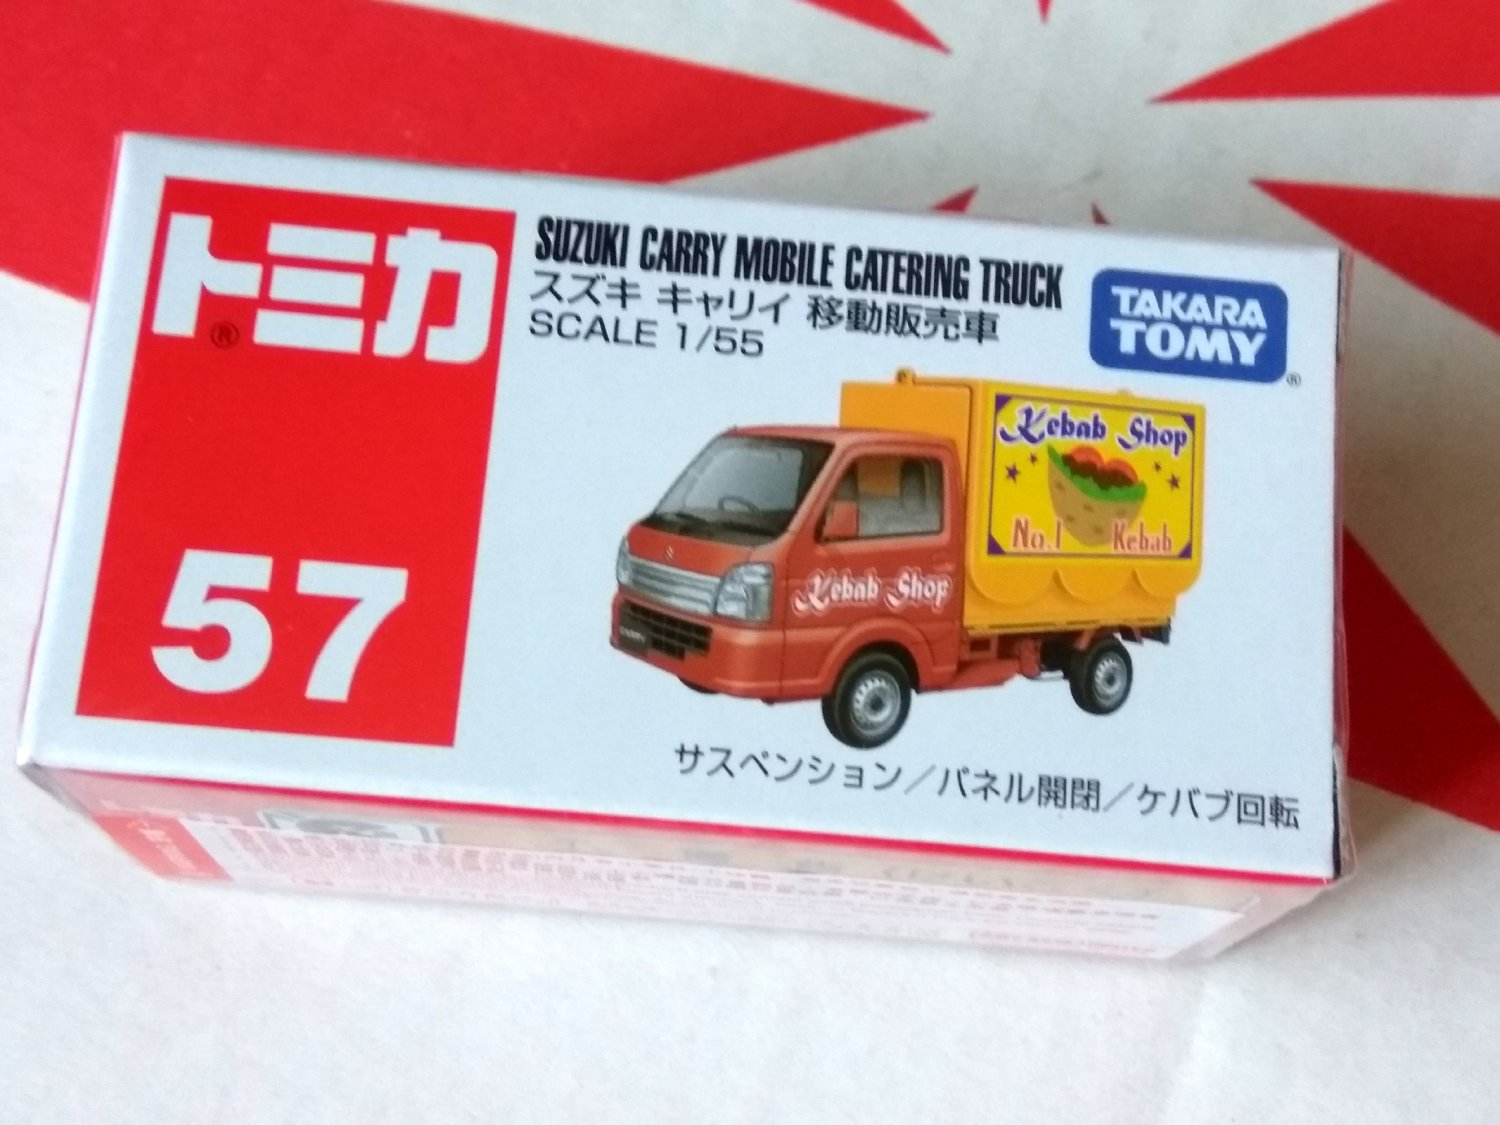 Takara Tomy Tomica #57 Suzuki Carry Mobile Catering Truck Toy Scale 1/ ...